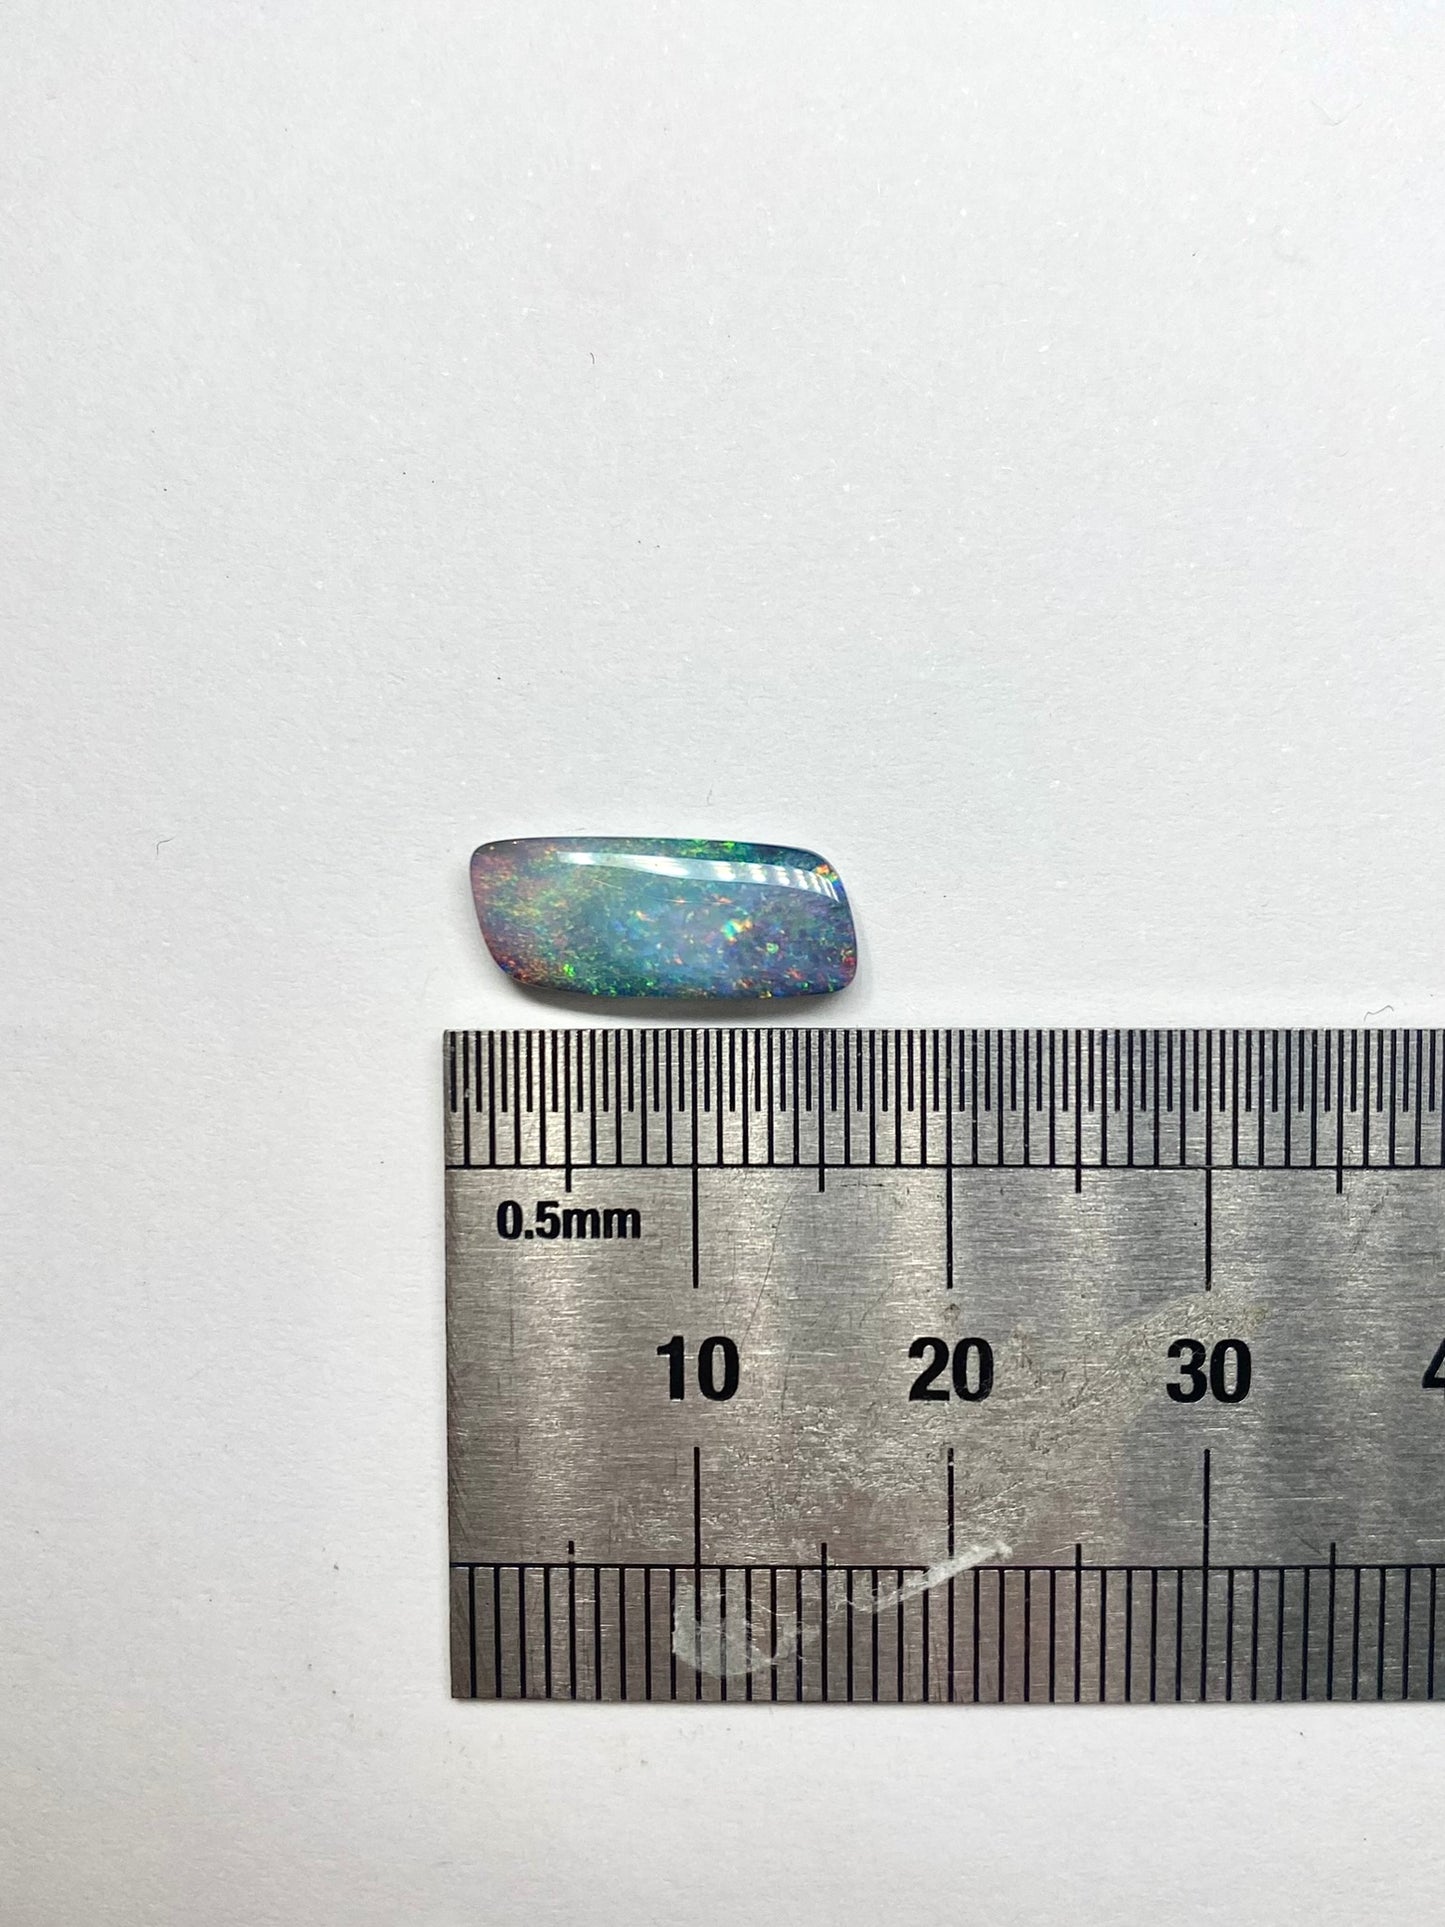 Lakeside Shimmer Opal - custom made in a ring for you